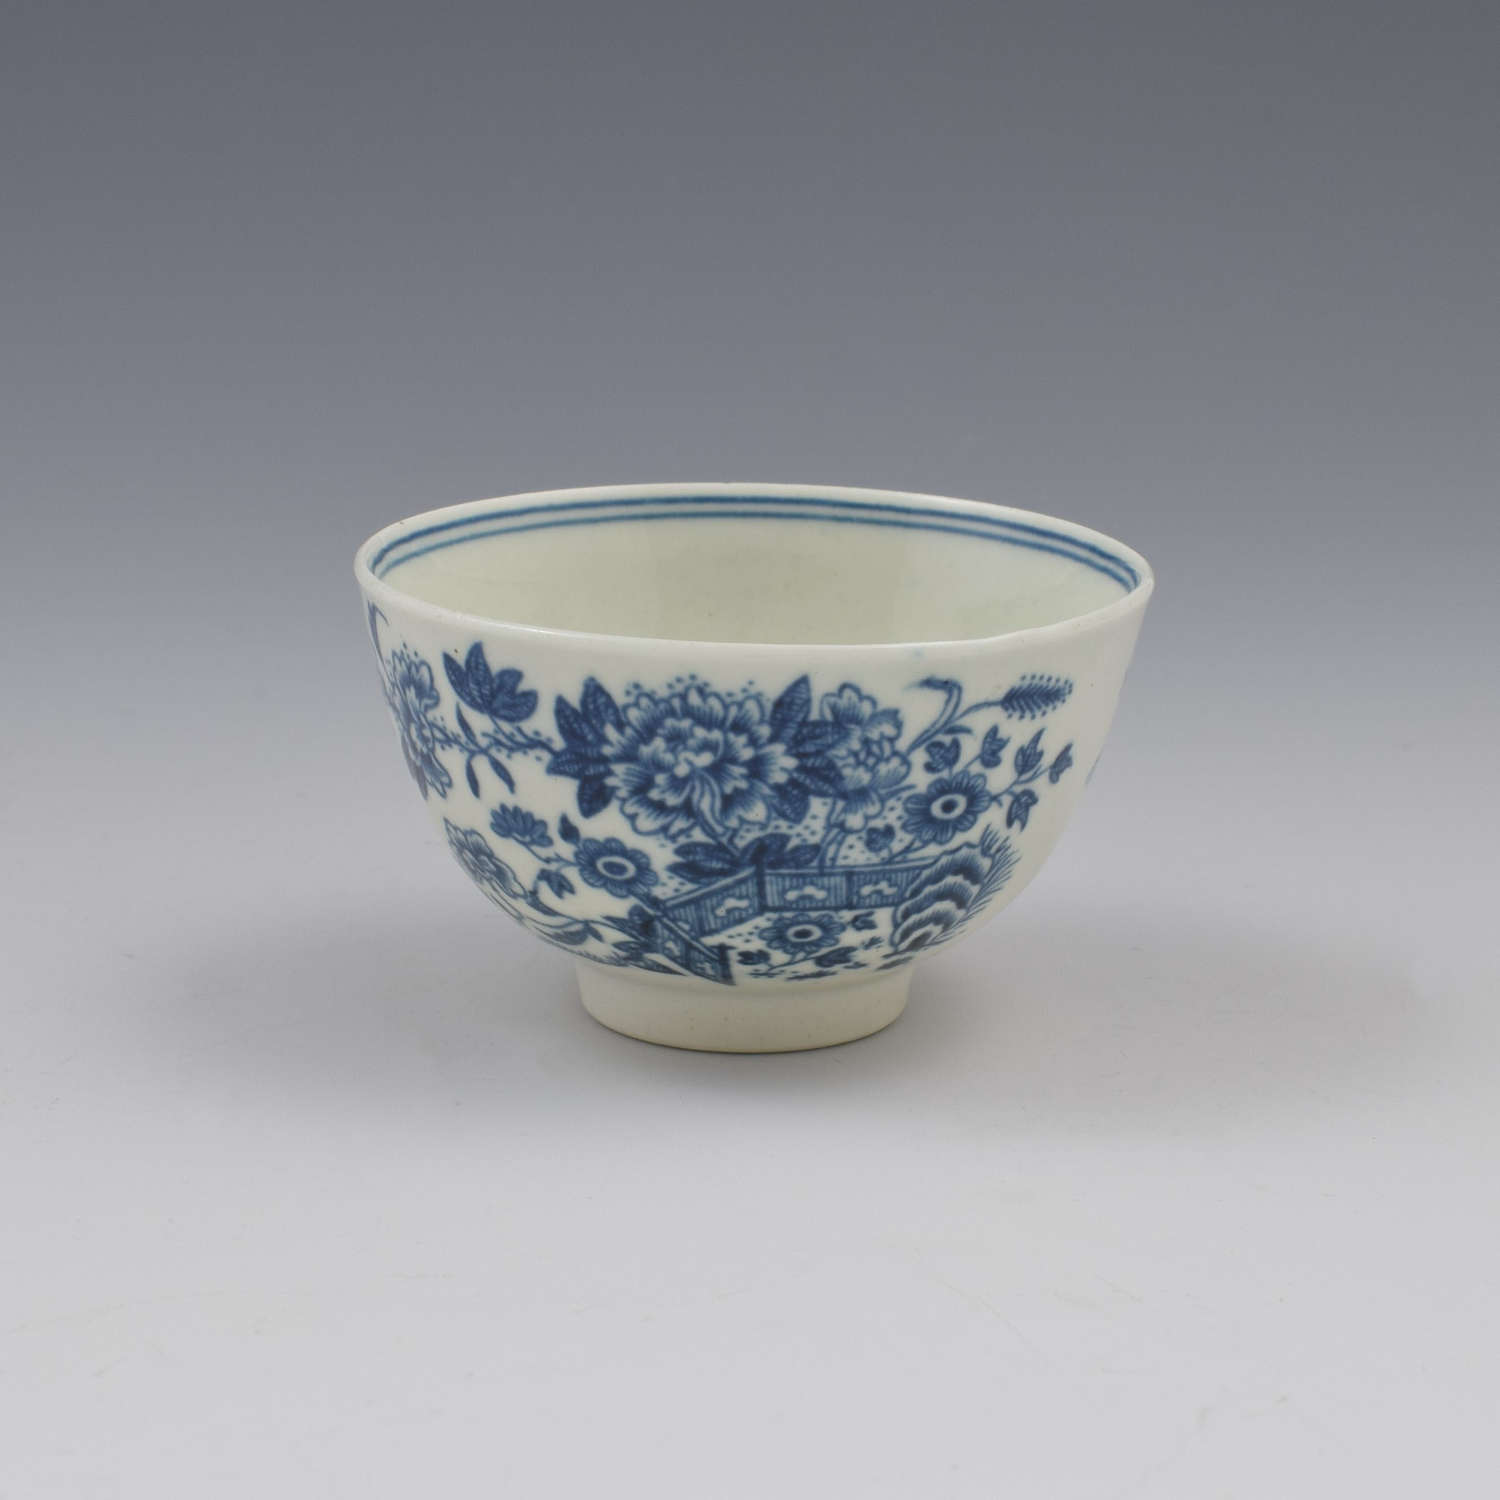 Small First Period Worcester Porcelain Fence Pattern Tea Bowl c.1765